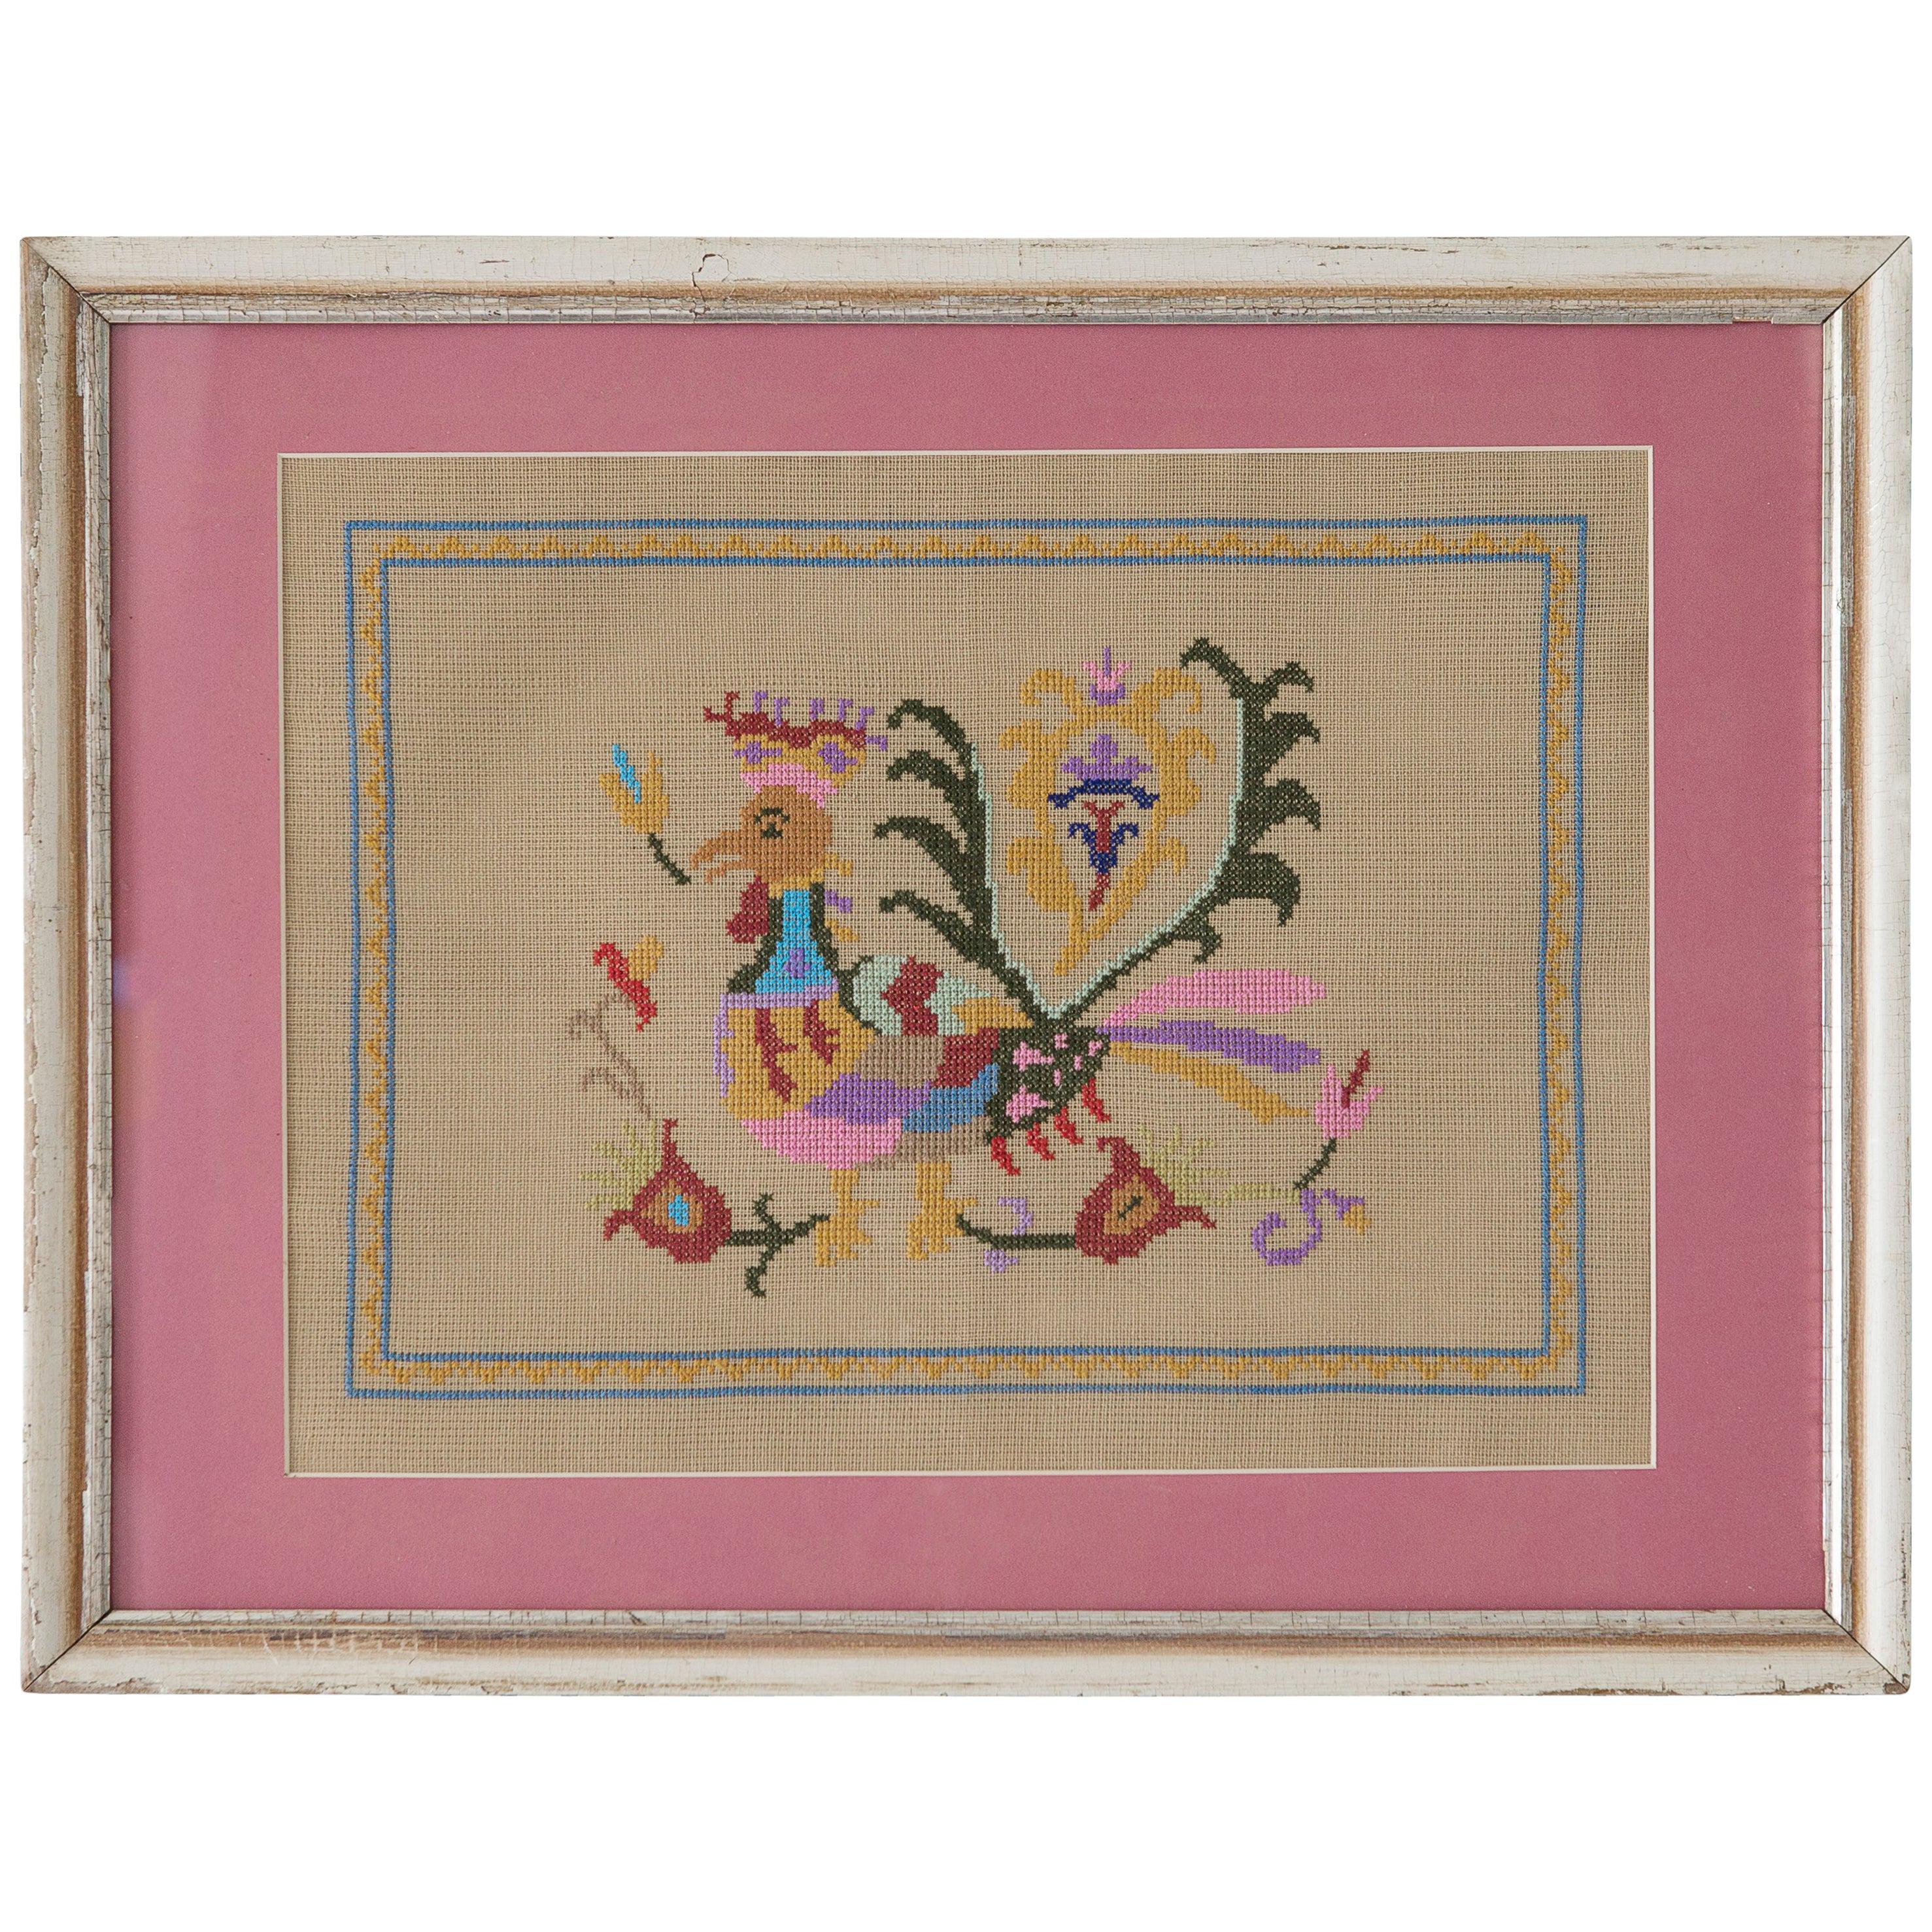 Vintage Wall Embroidery in Antique Frame